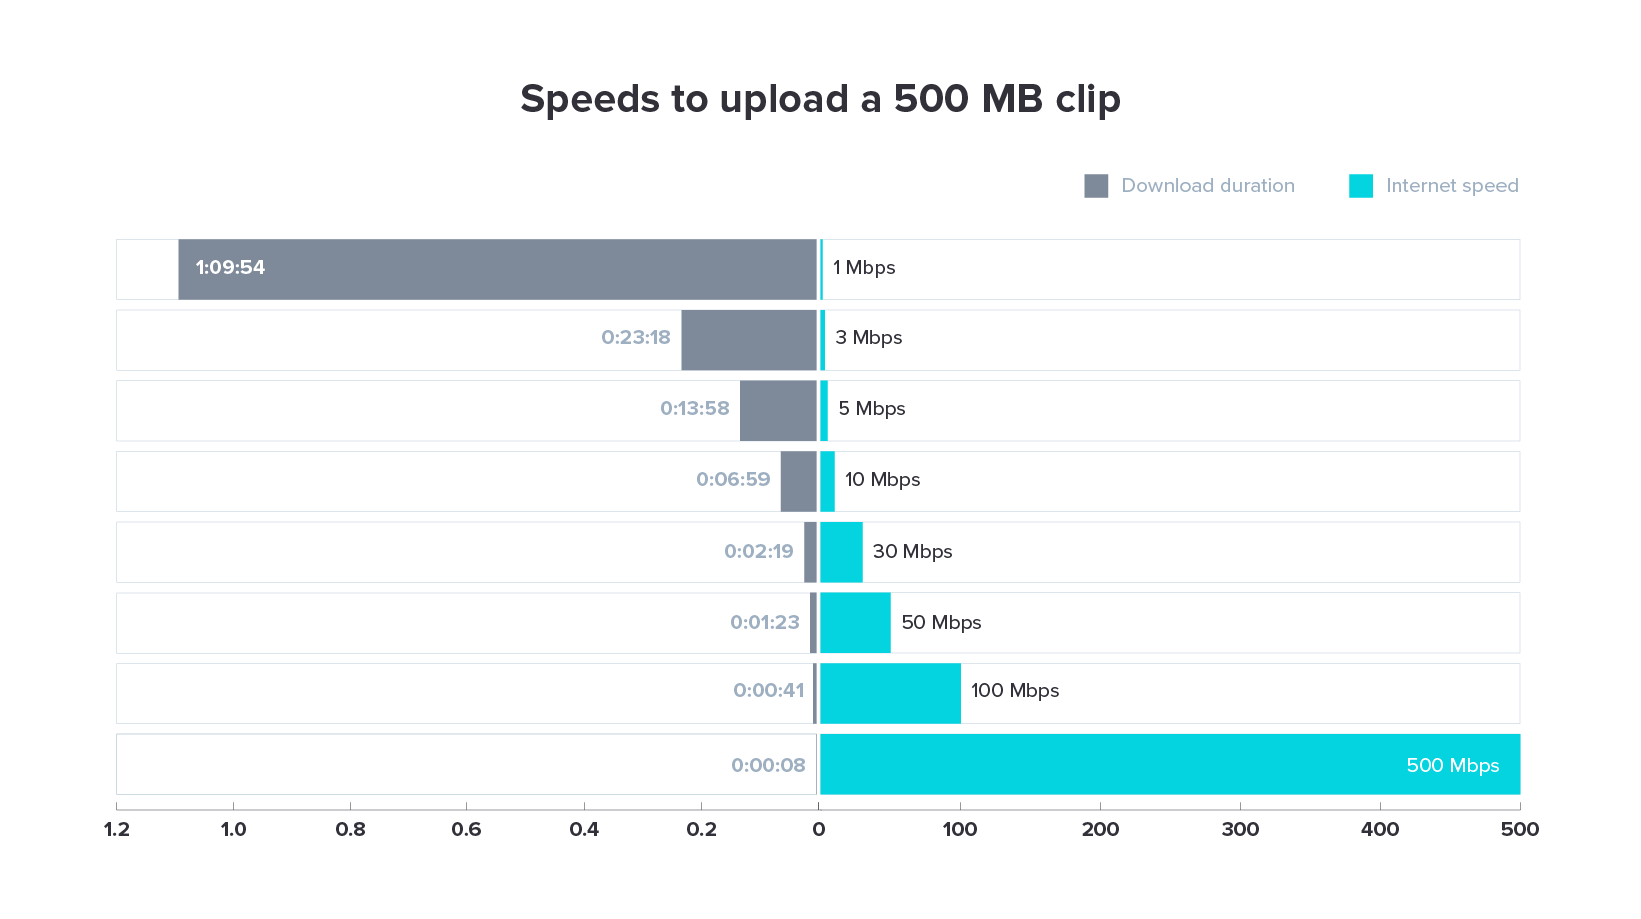 Comparison of video download times over various internet speed tiers